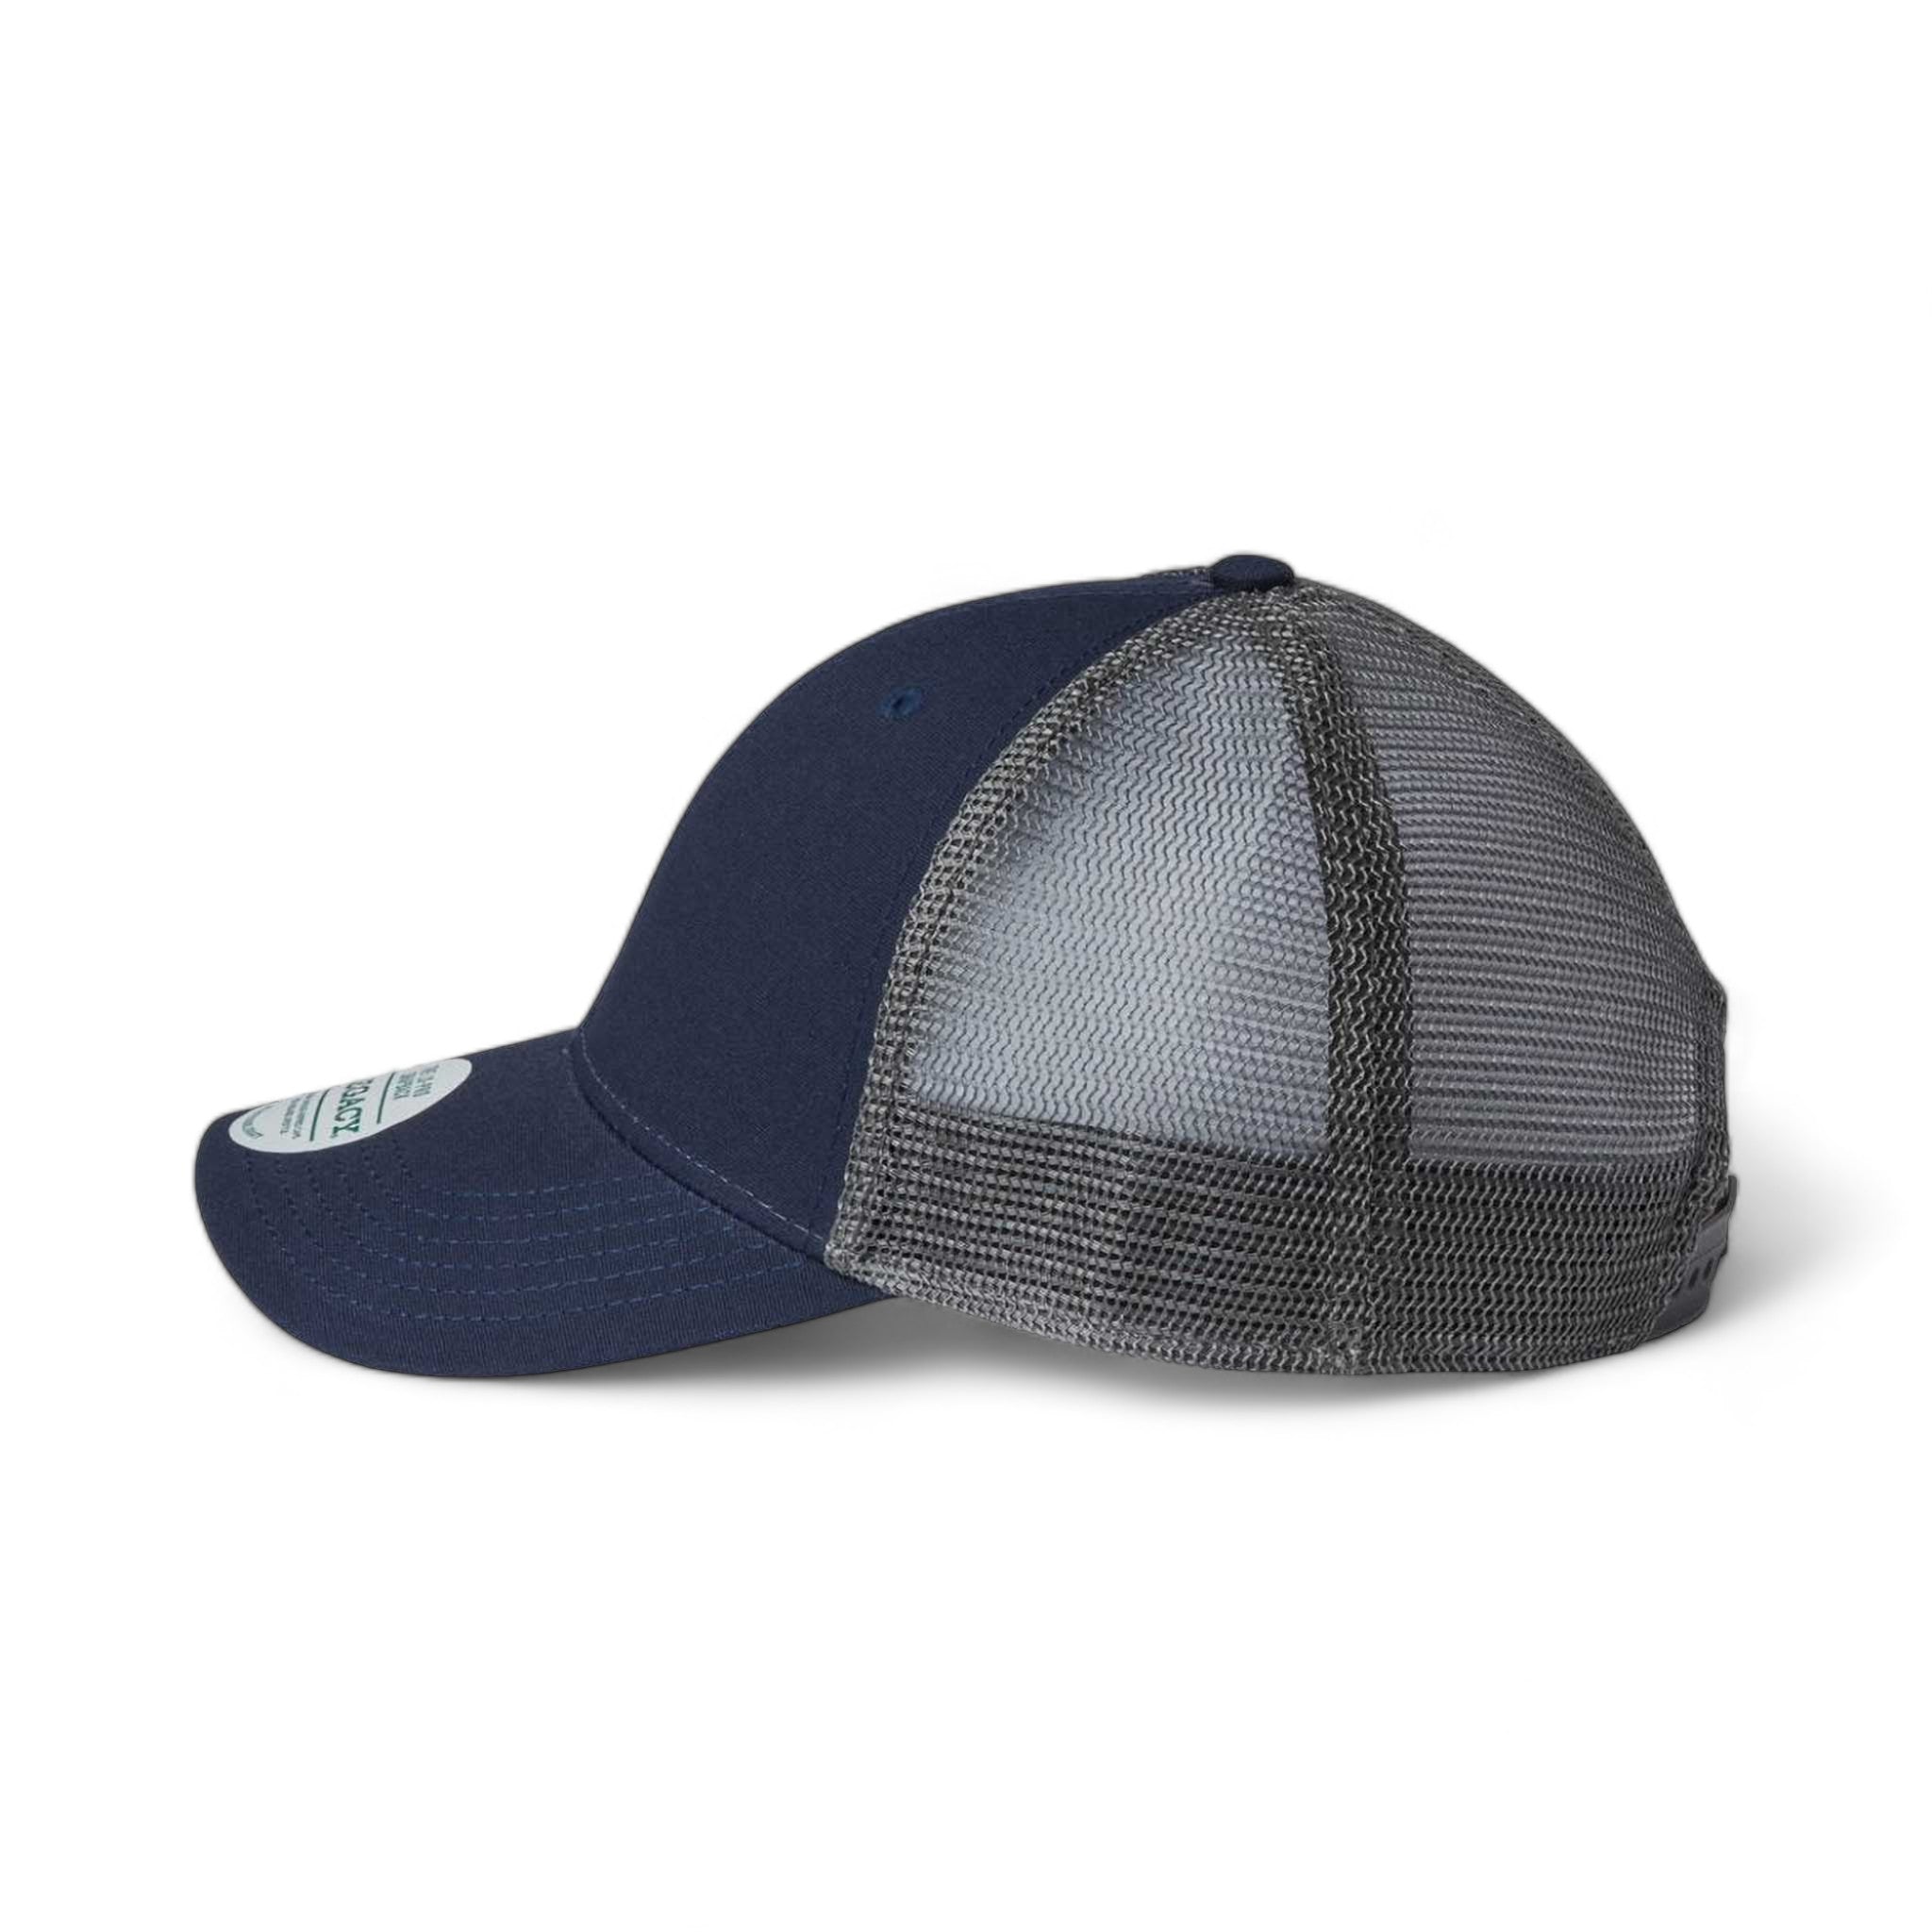 Side view of LEGACY LPS custom hat in navy and dark grey